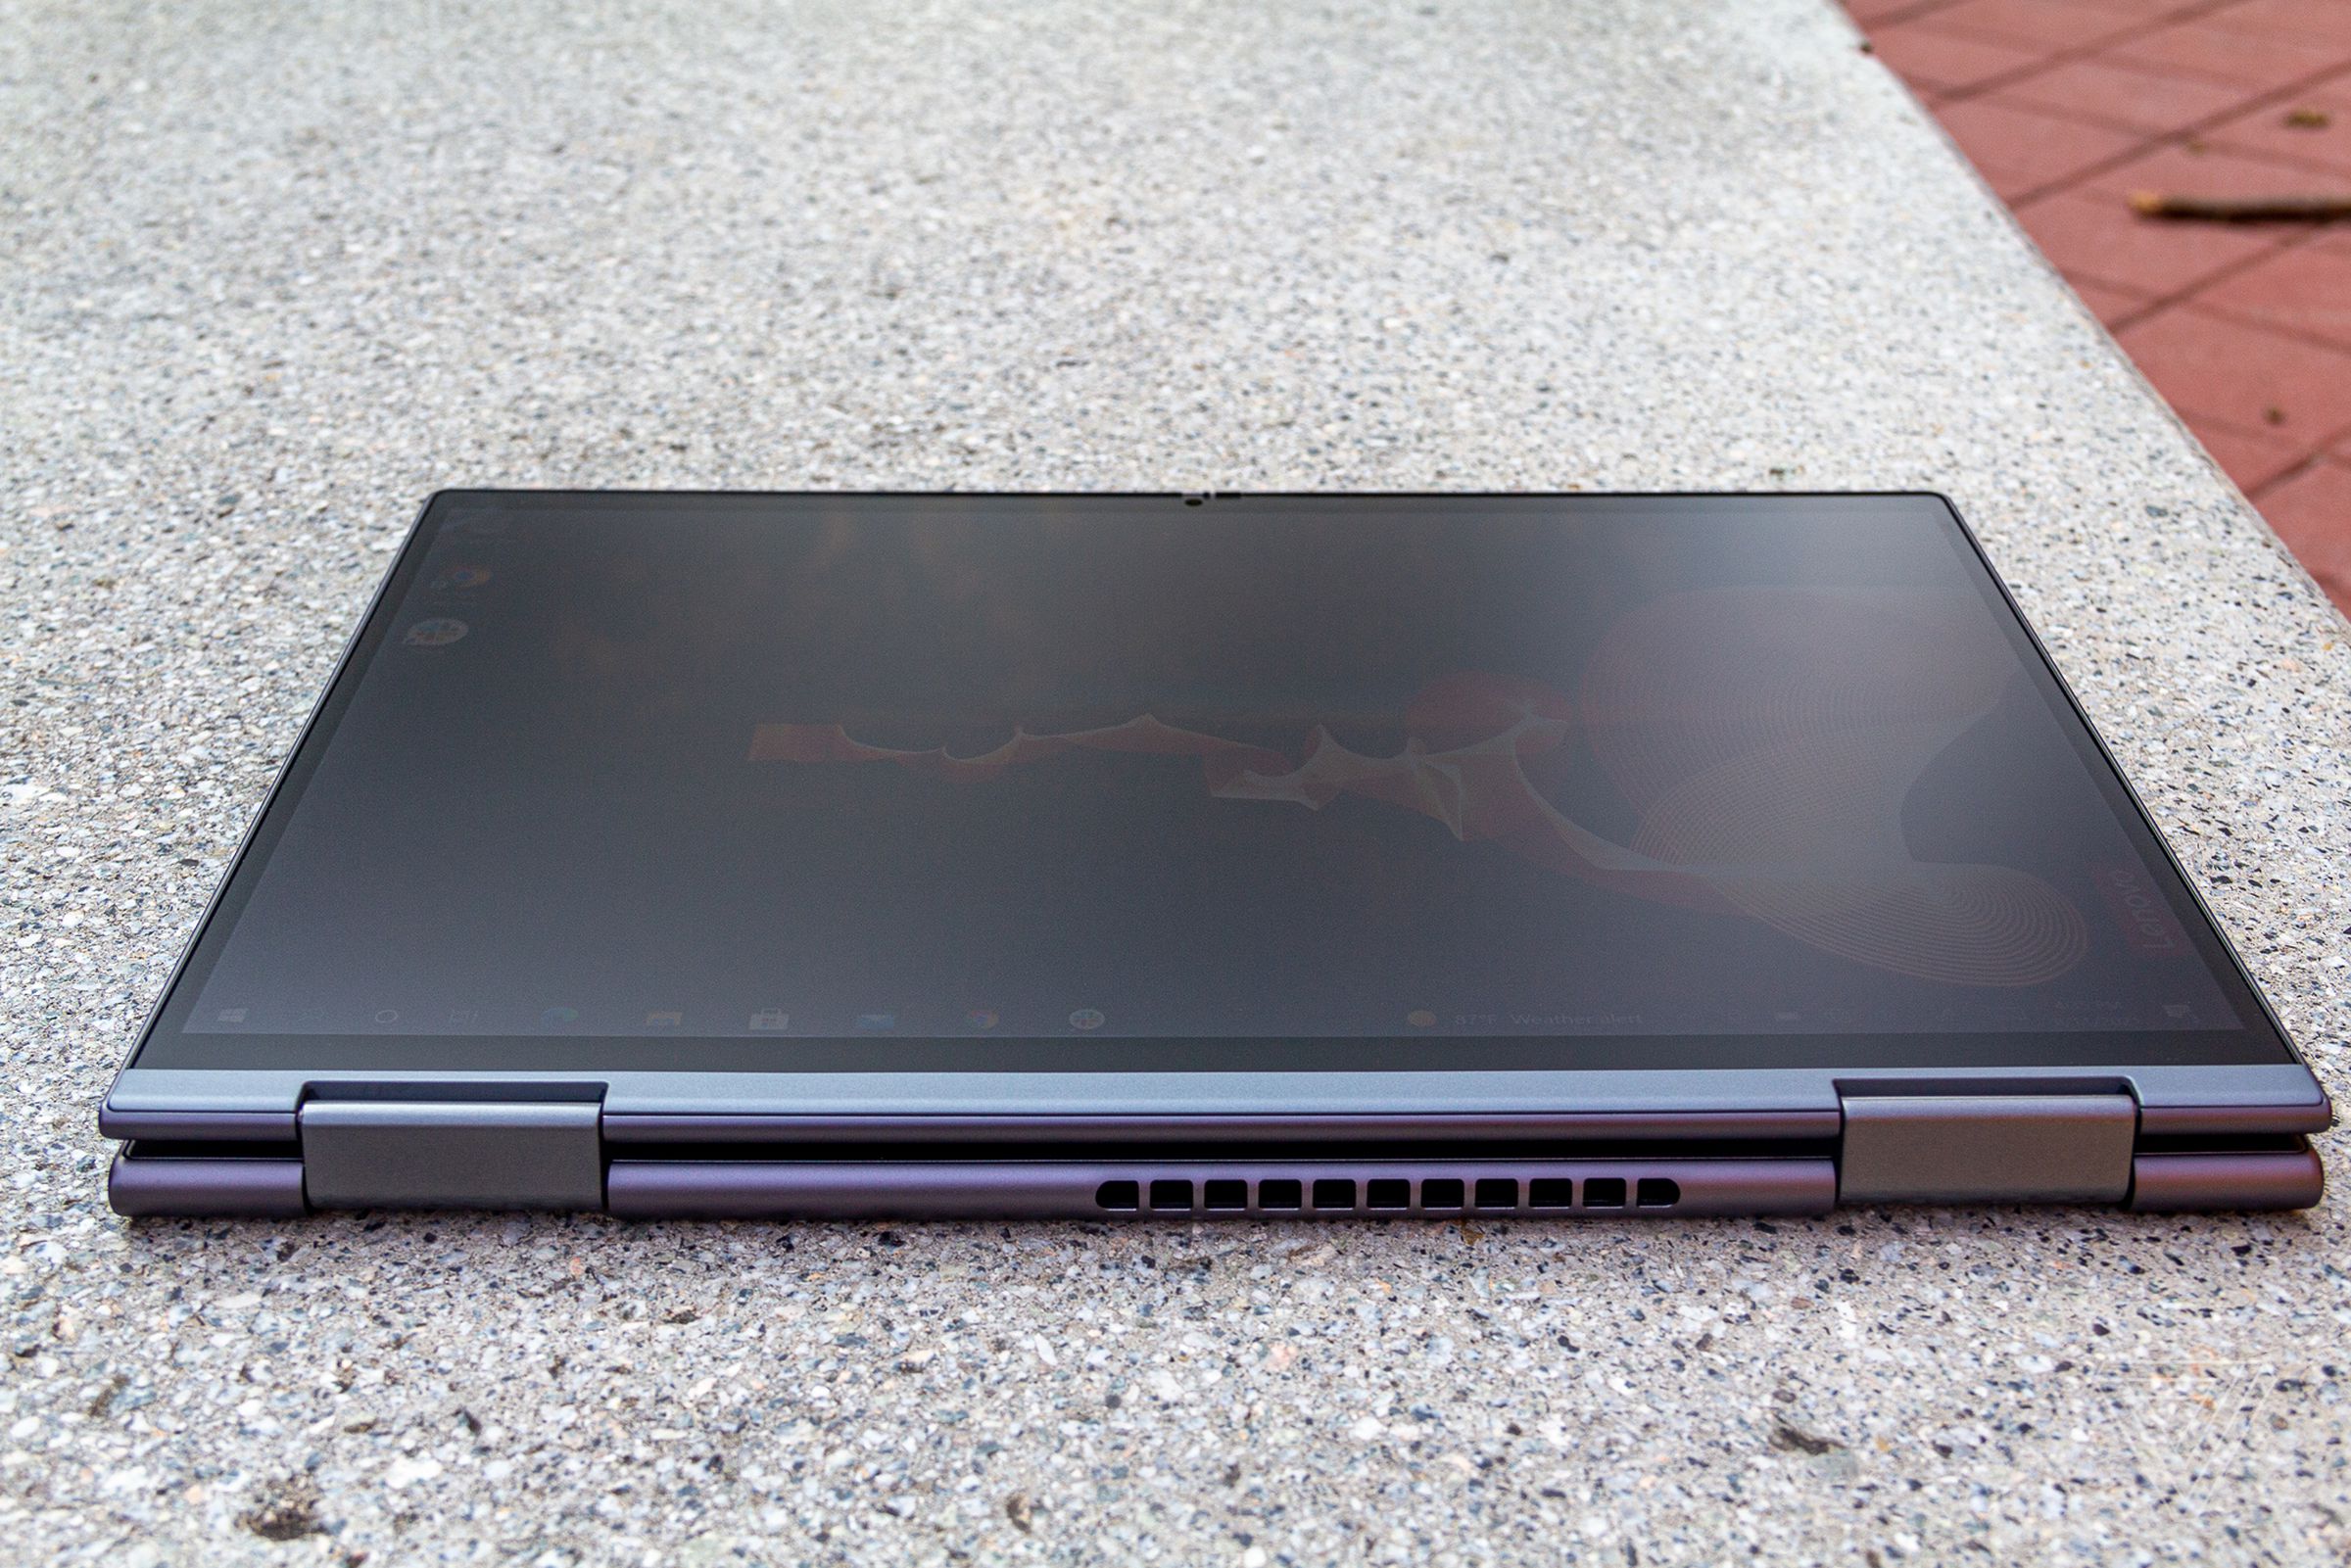 The ThinkPad X1 Yoga in tablet mode, seen from above, on a stone bench.